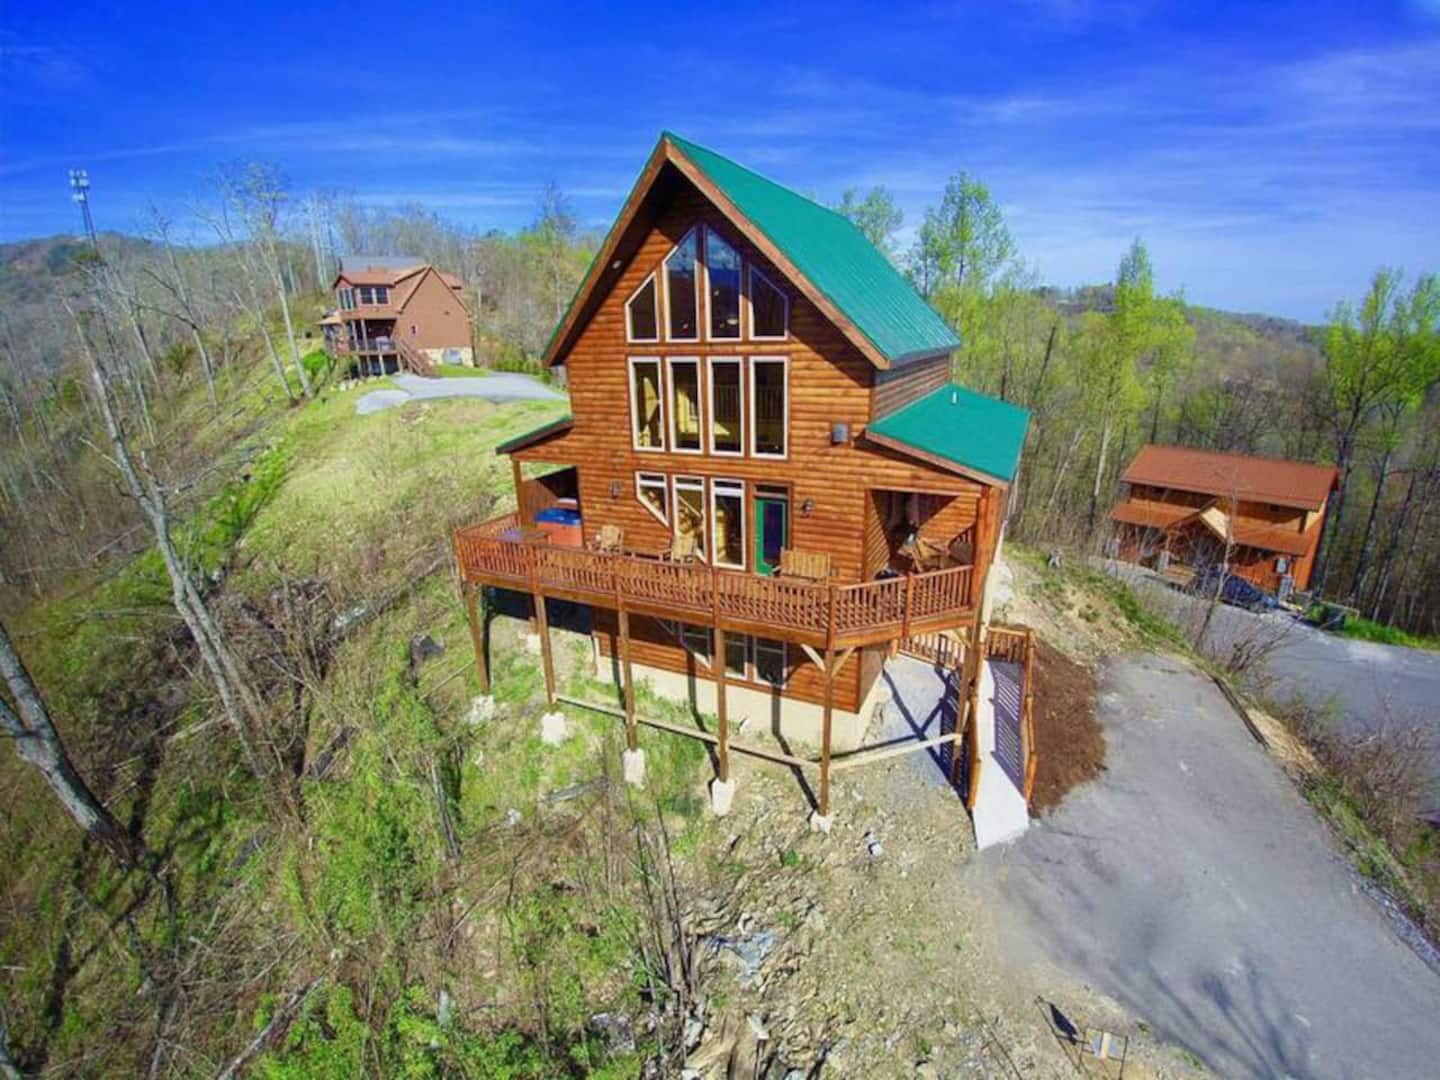 The Cozy Cub Cabin-relax with Smoky Mountain Views